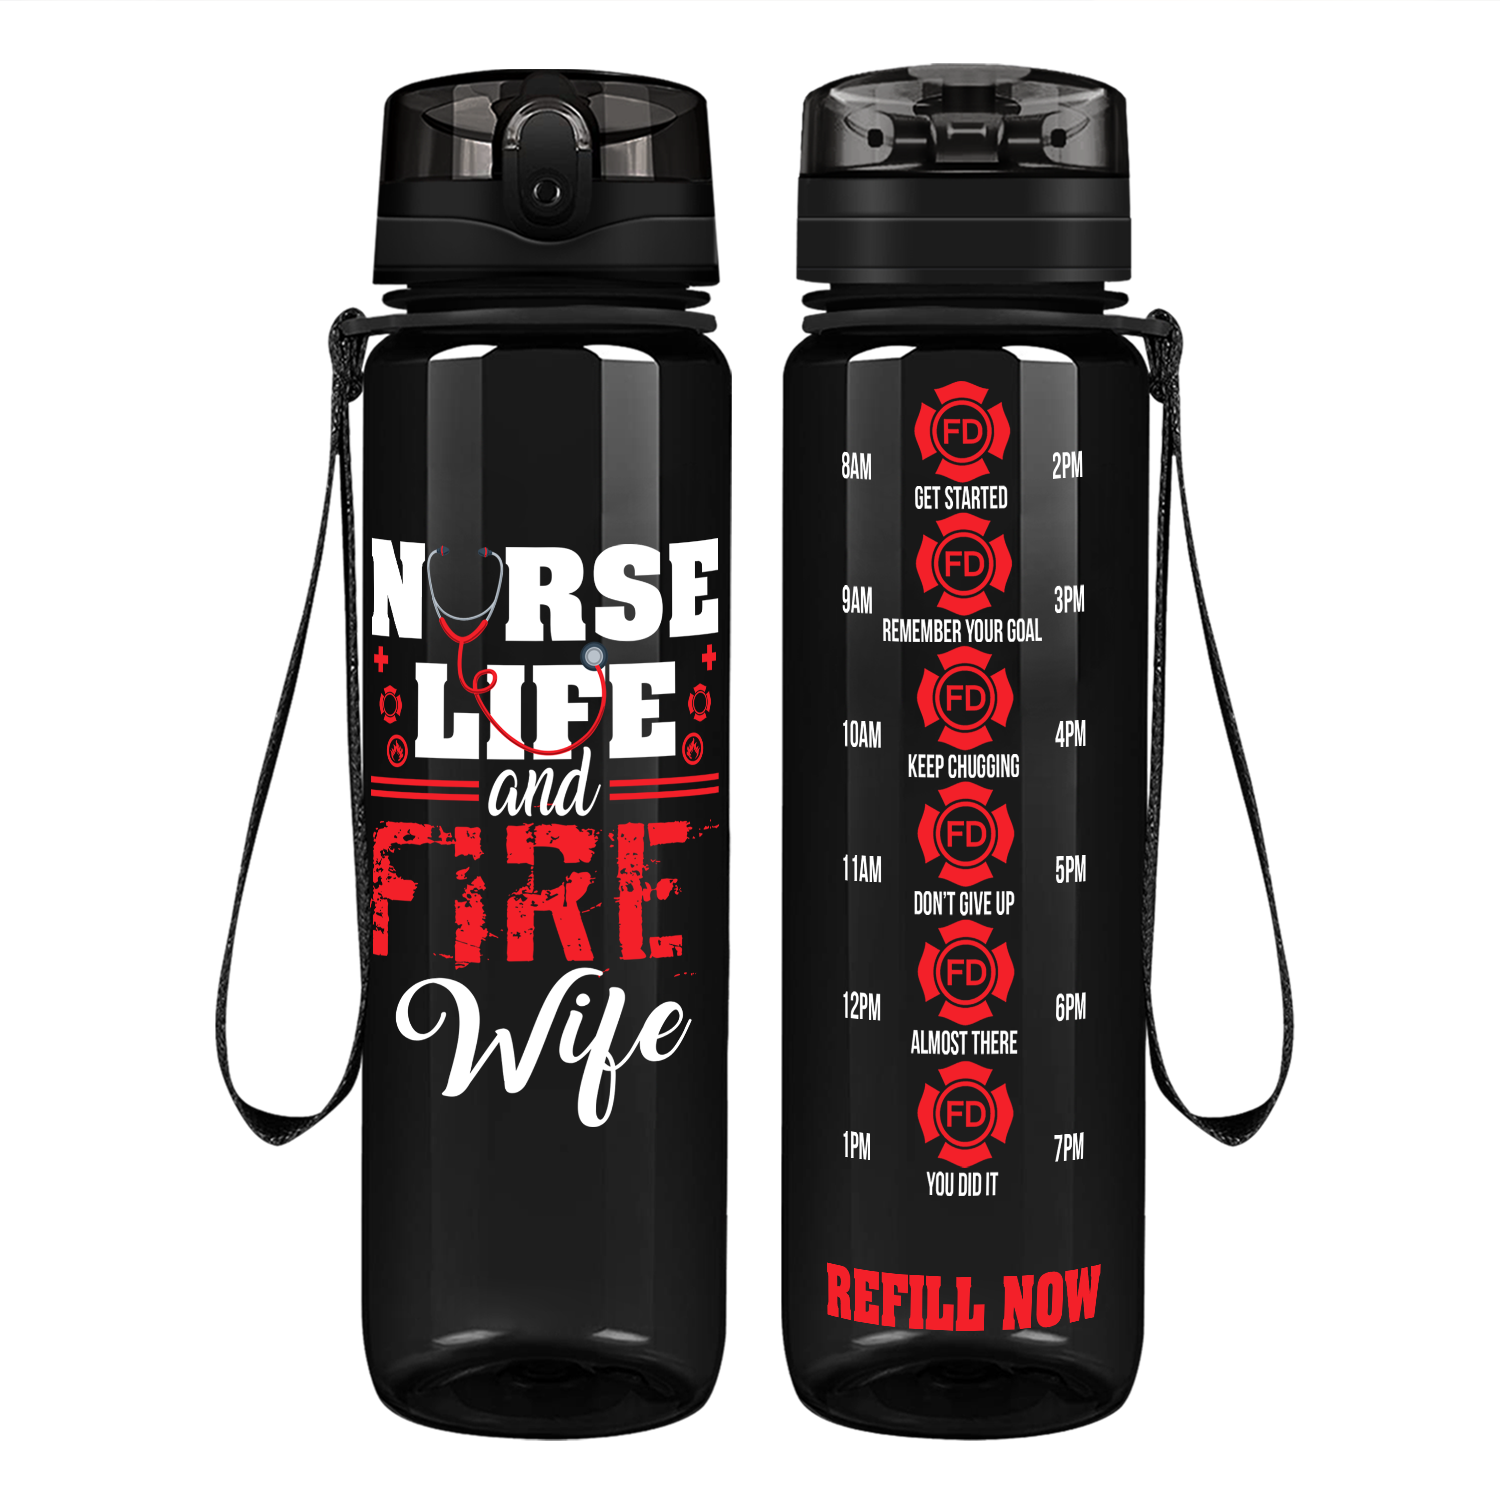 Nurse Life And Fire Wife on 32 oz Motivational Tracking Water Bottle